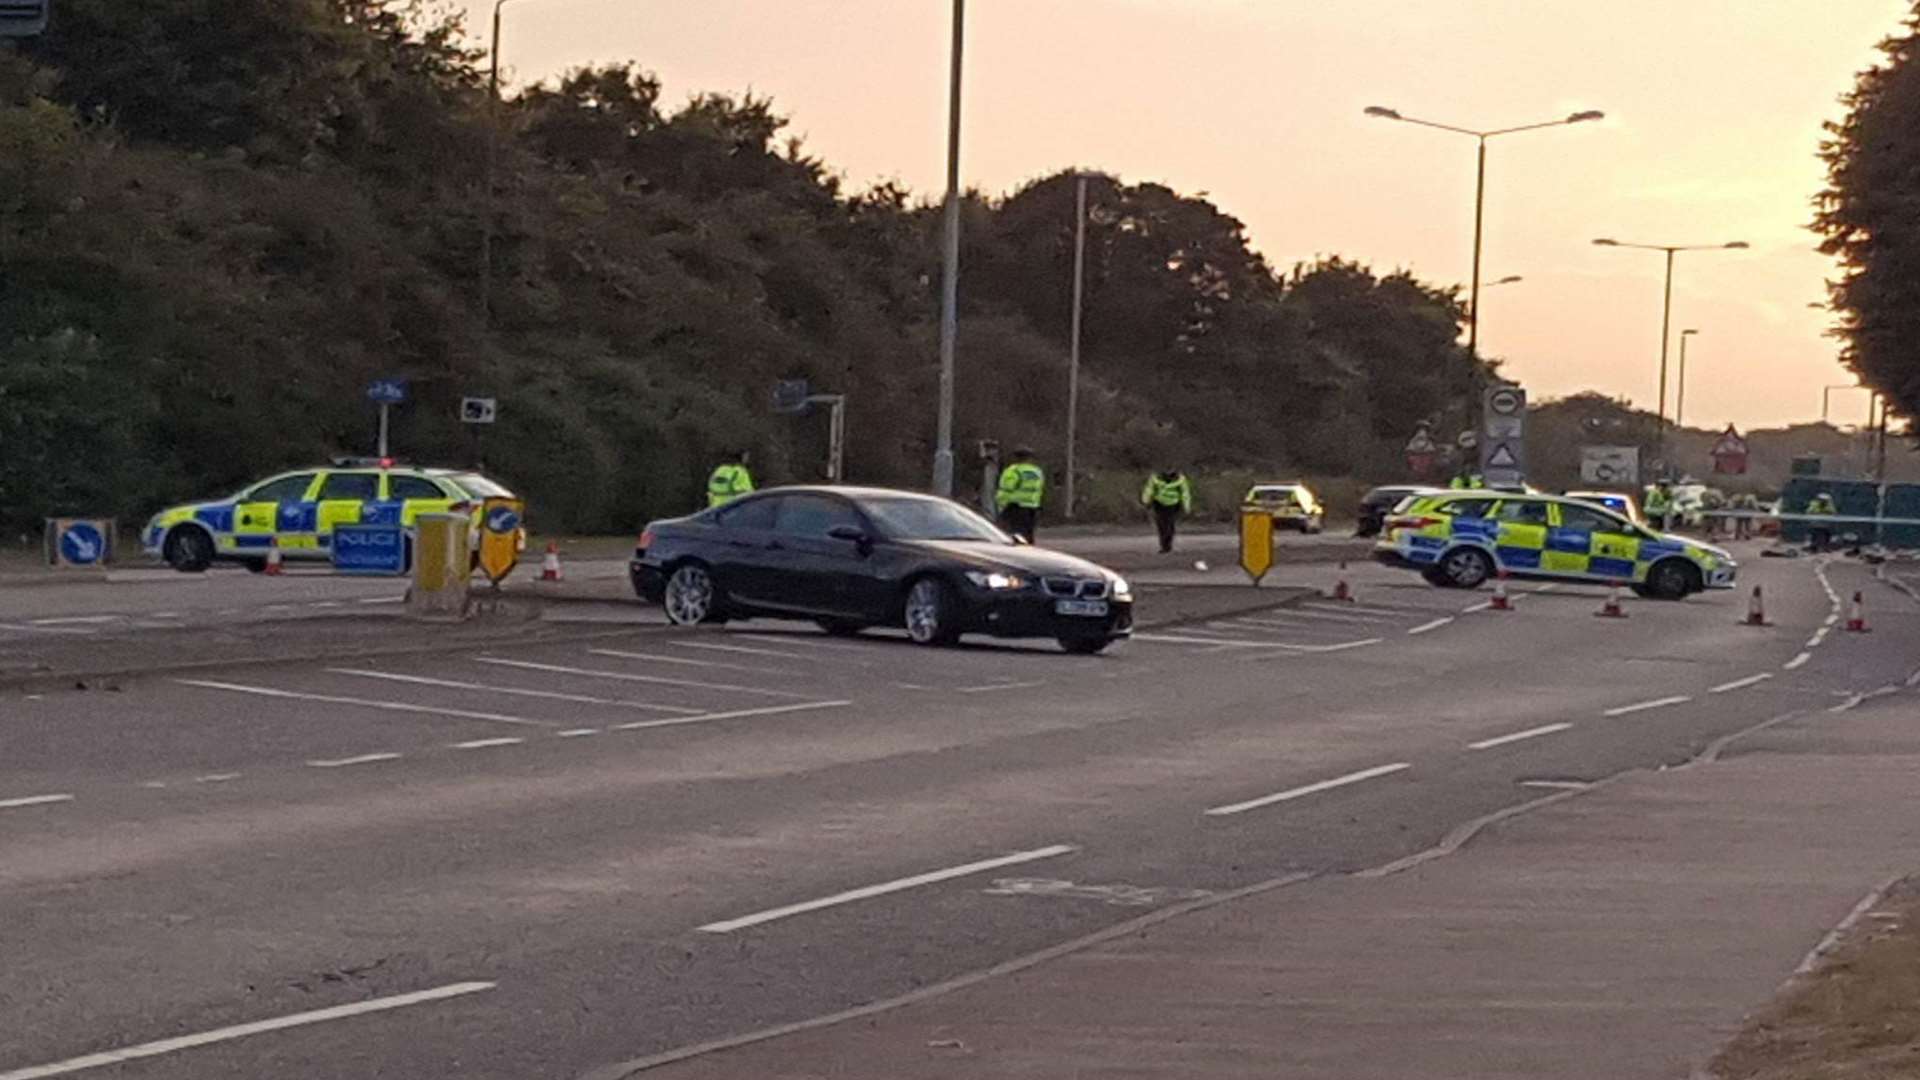 The road was shut for more around five hours following the fatal crash